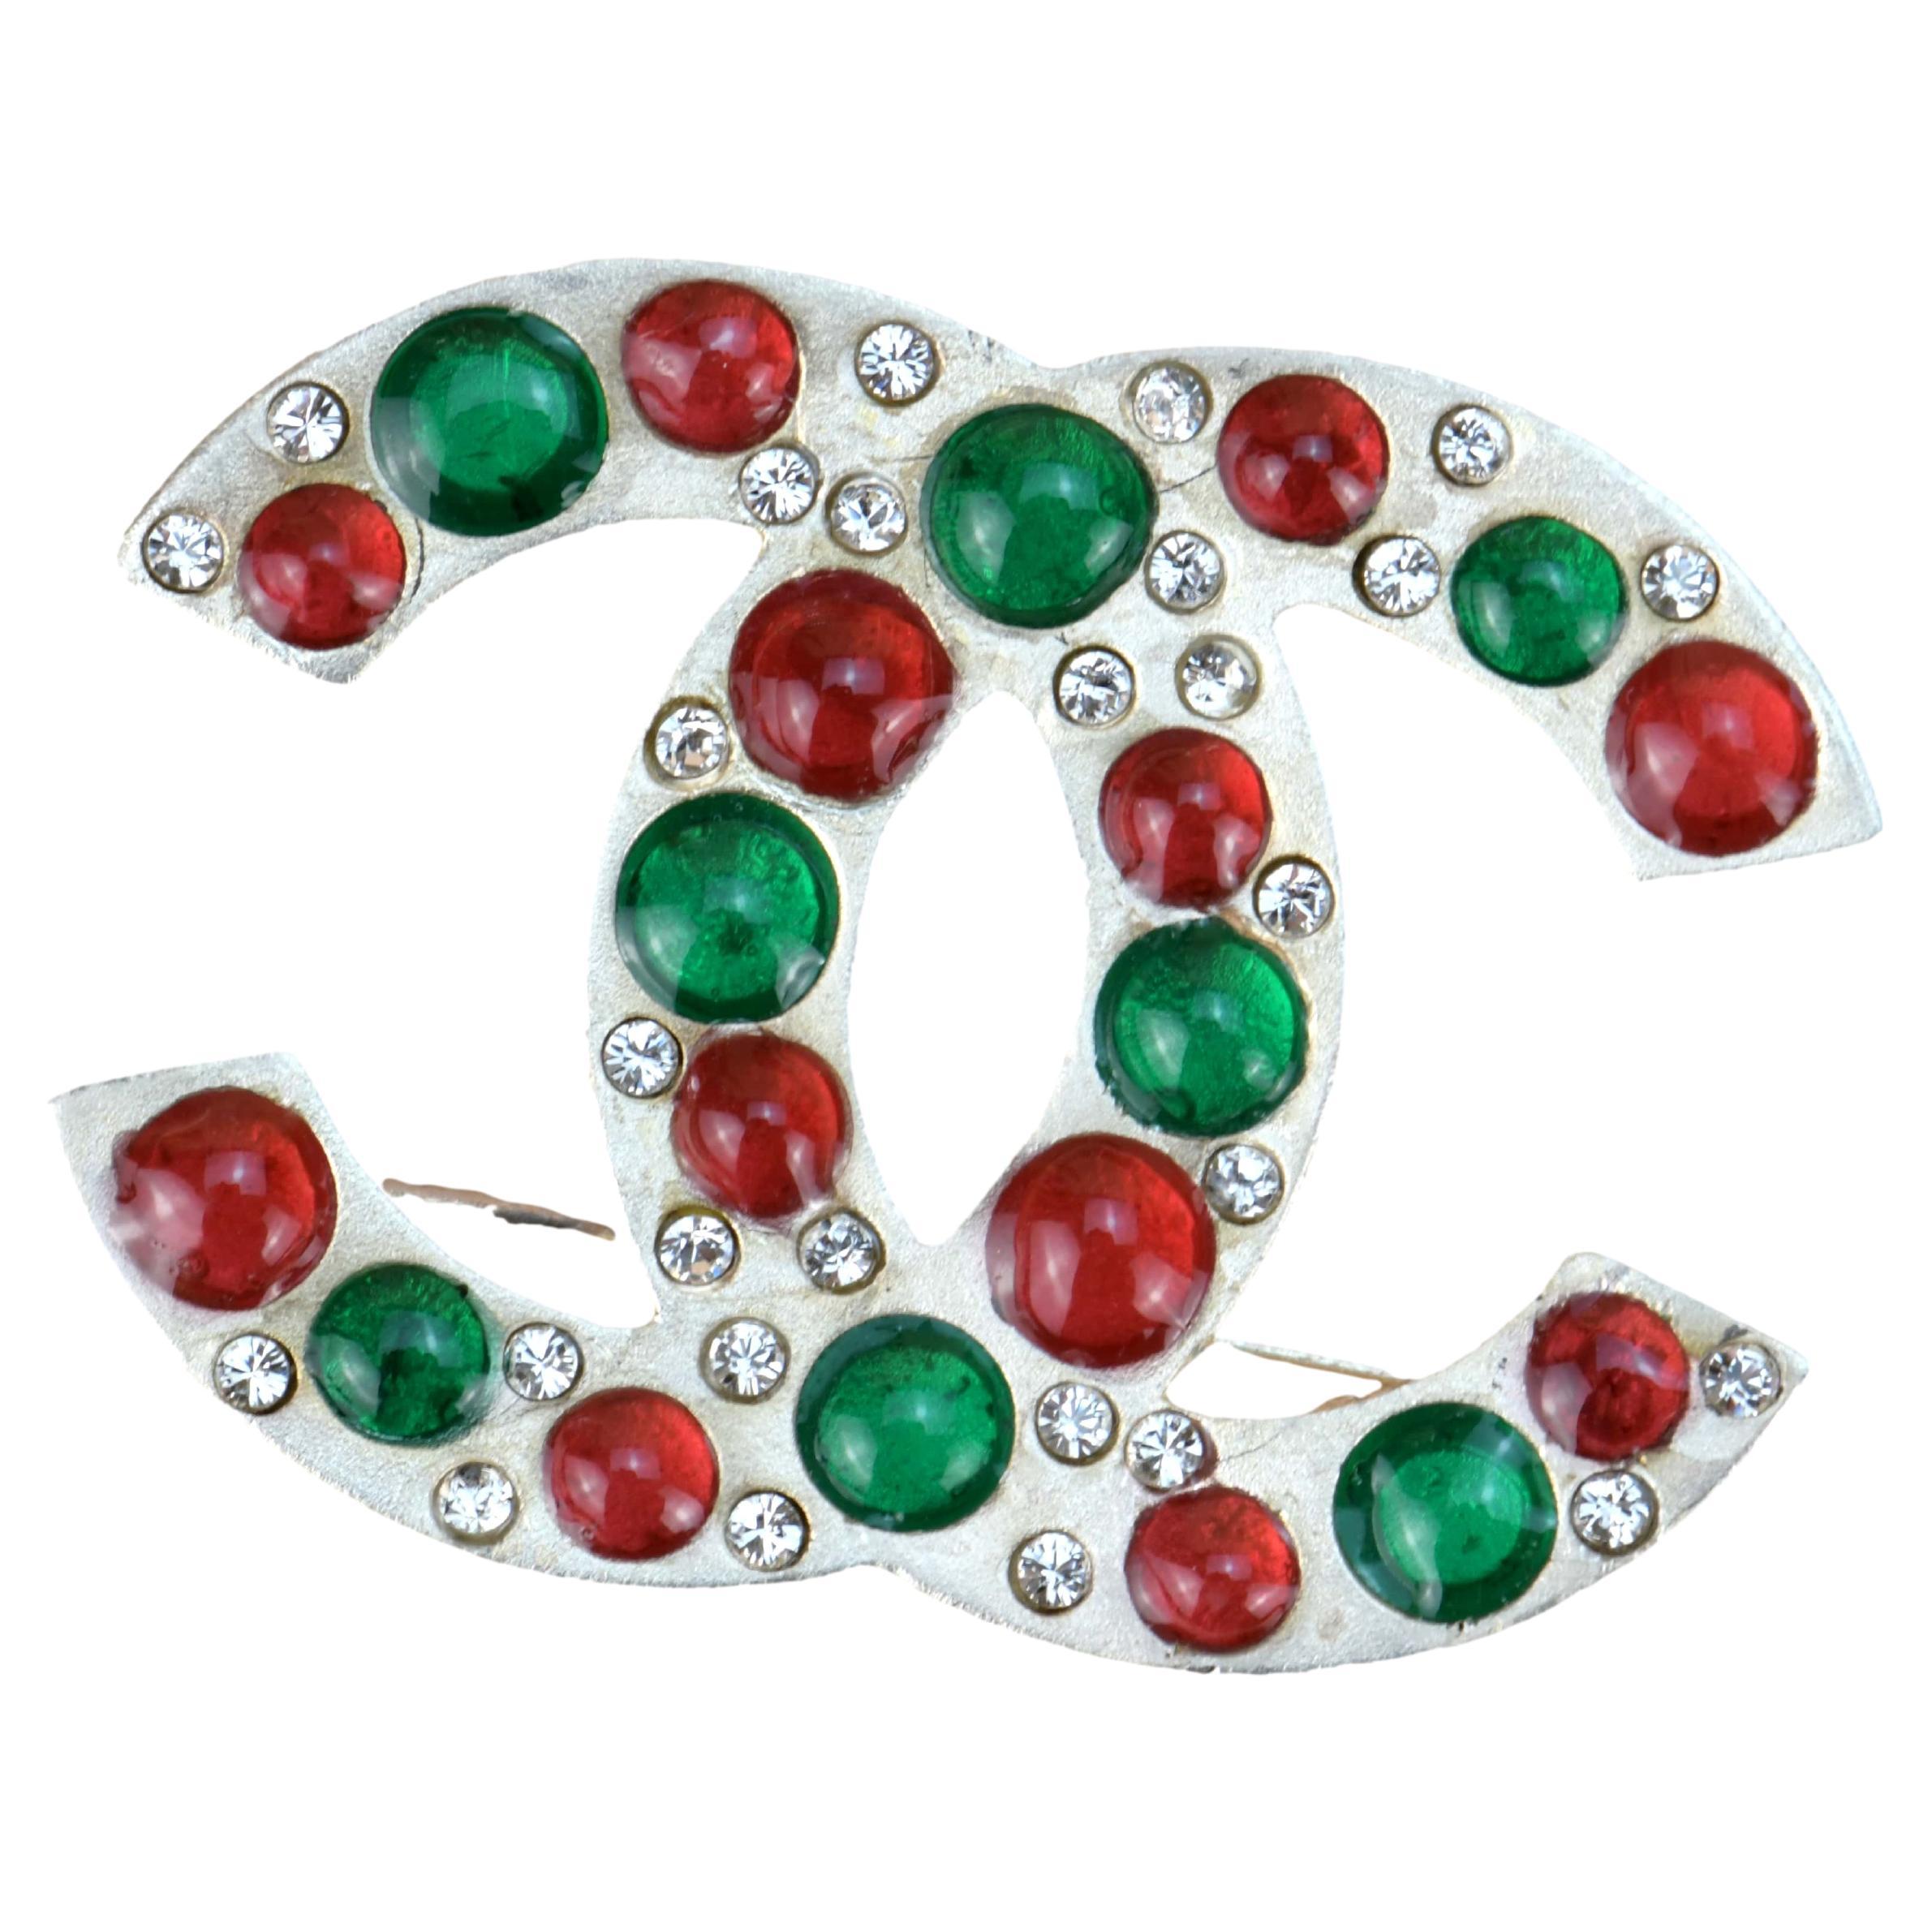 Chanel Vintage Silver Gilt CC Brooch with Vermilion and Emerald Green Gripoix